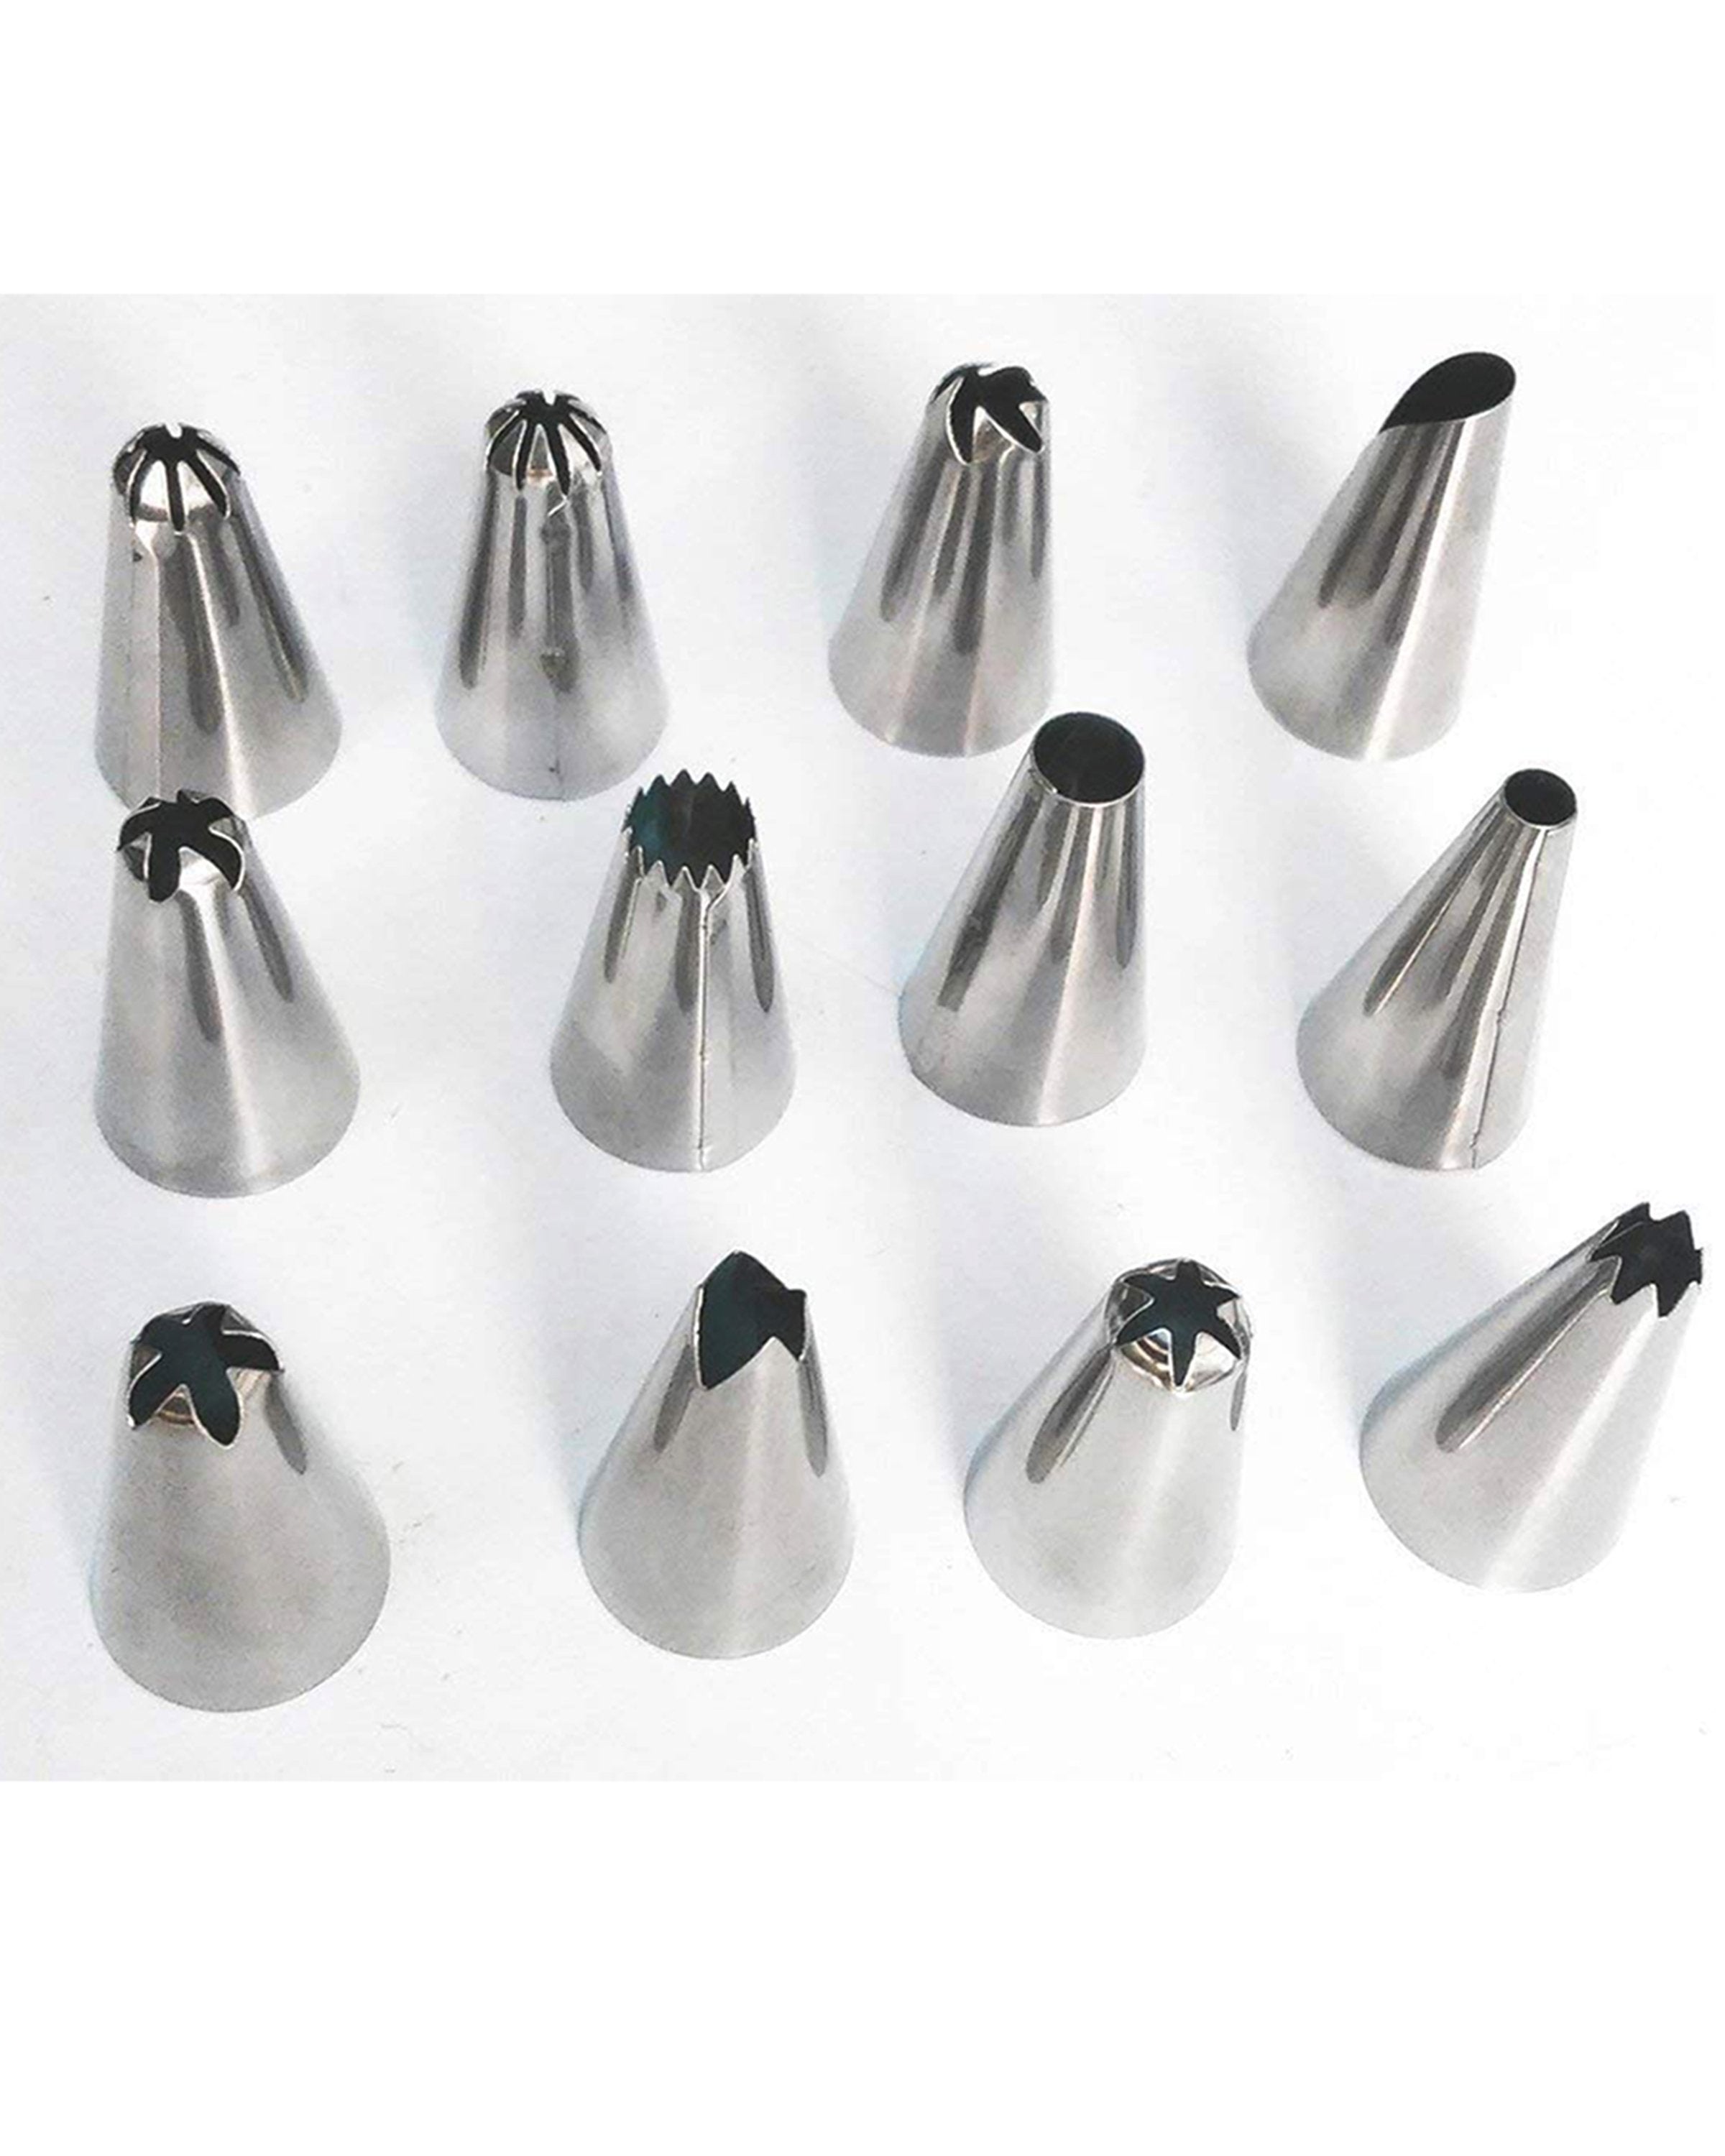 0836 12 Piece Cake Decorating Set of Measuring Cup Oil Basting Brush - SkyShopy